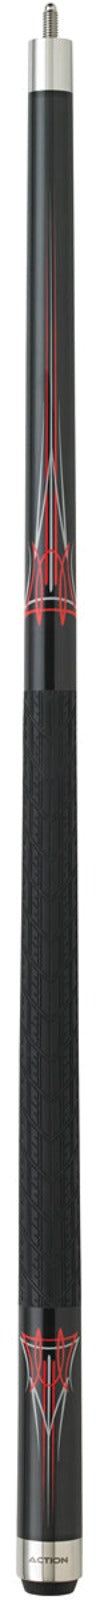 Action KRM03 Pool Cue -Action